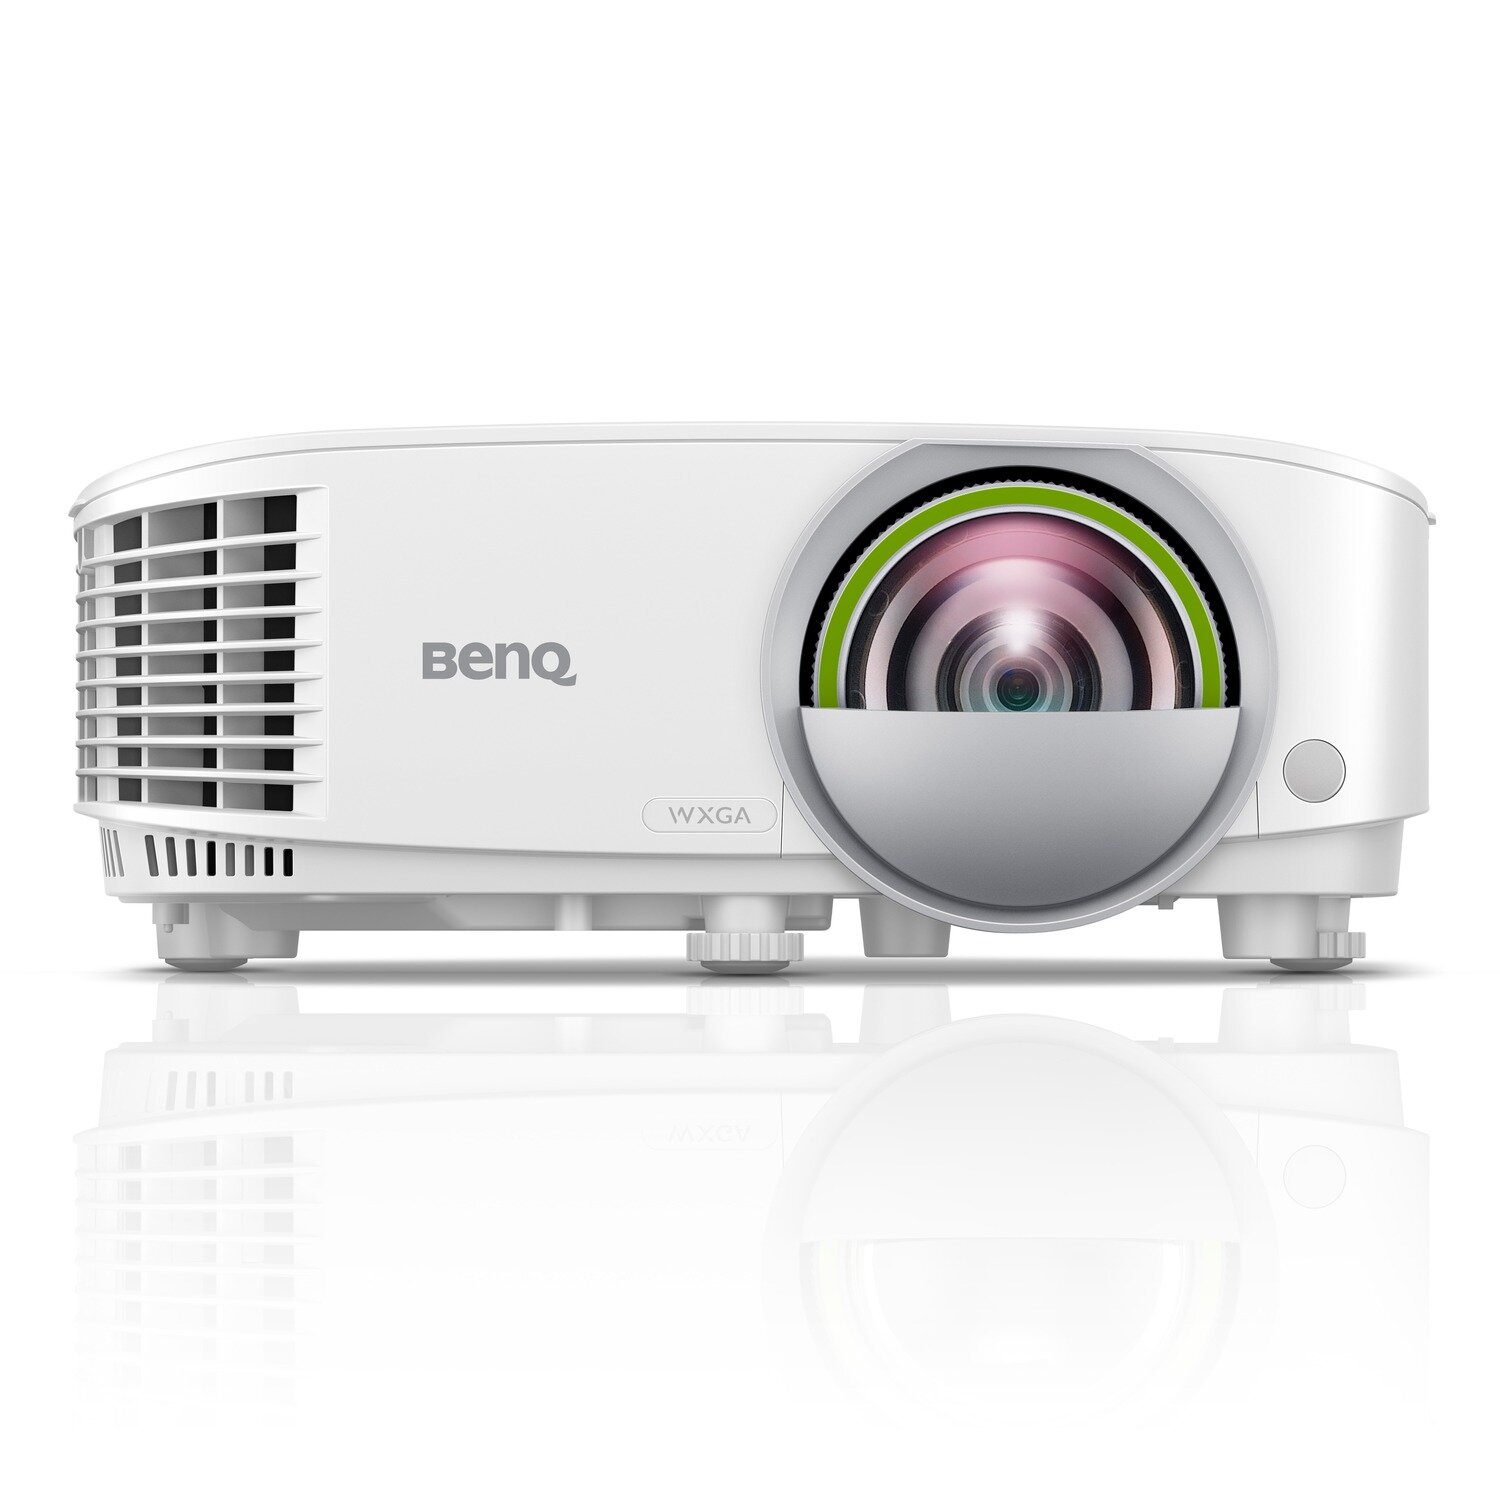 BENQ EW800ST WXGA 3300 ANSI 20000:1 CONTRAST ANDROID-BASED SMART PROJECTOR